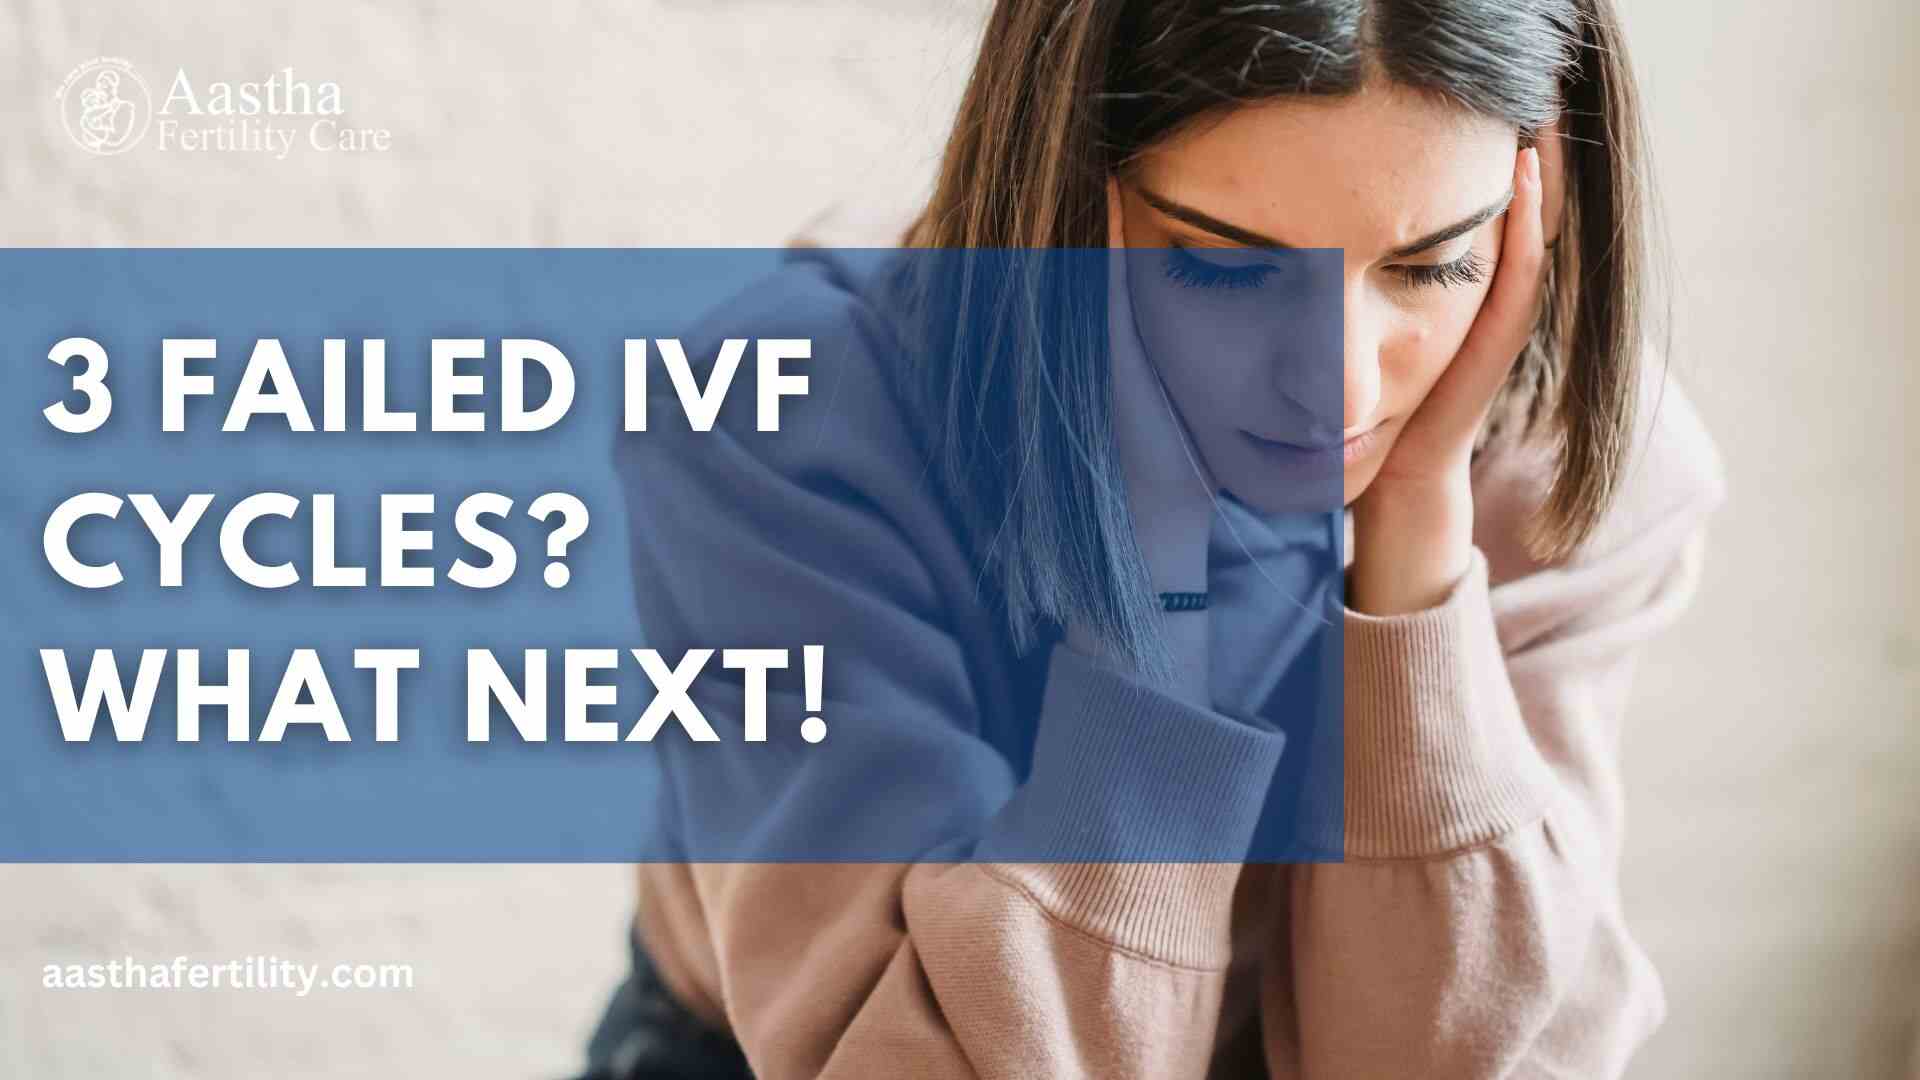 3 Failed IVF Cycles: What Next?